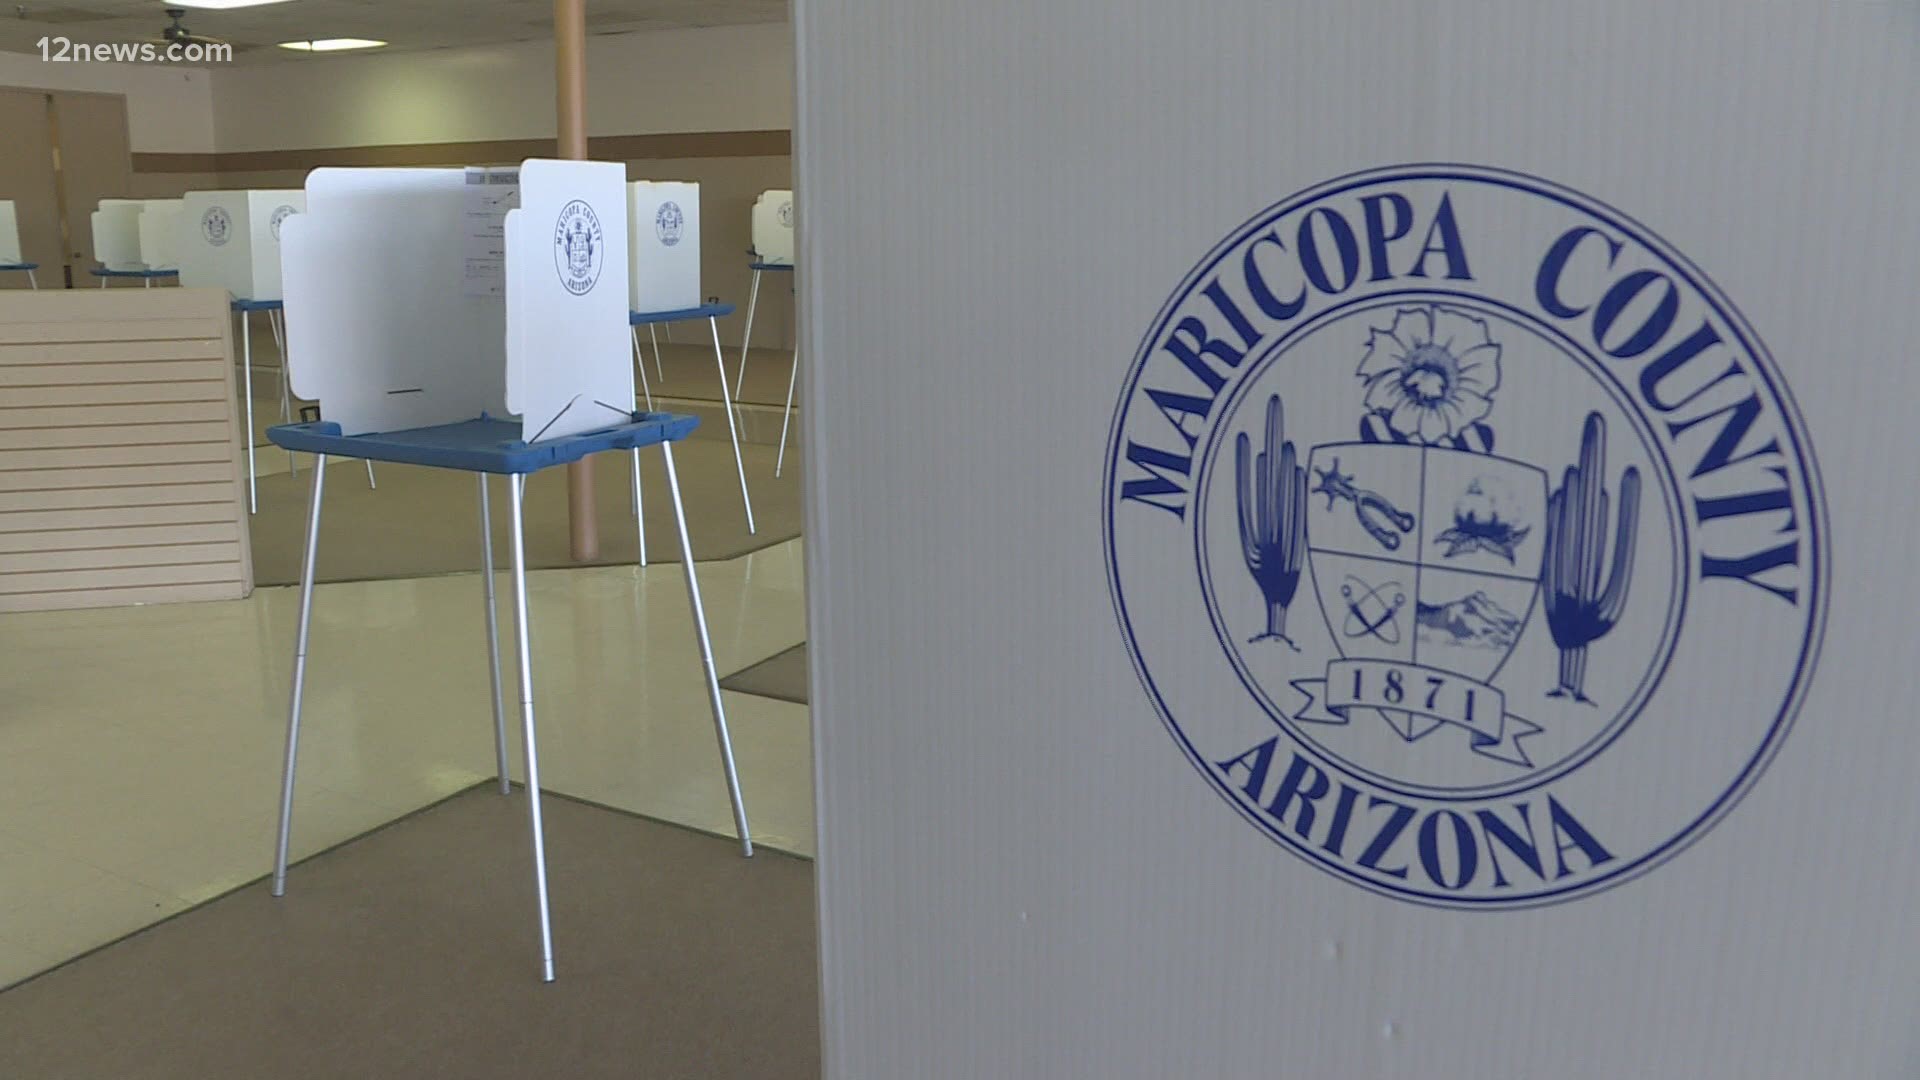 You have until Thursday to register to vote in the 2020 election in Arizona.